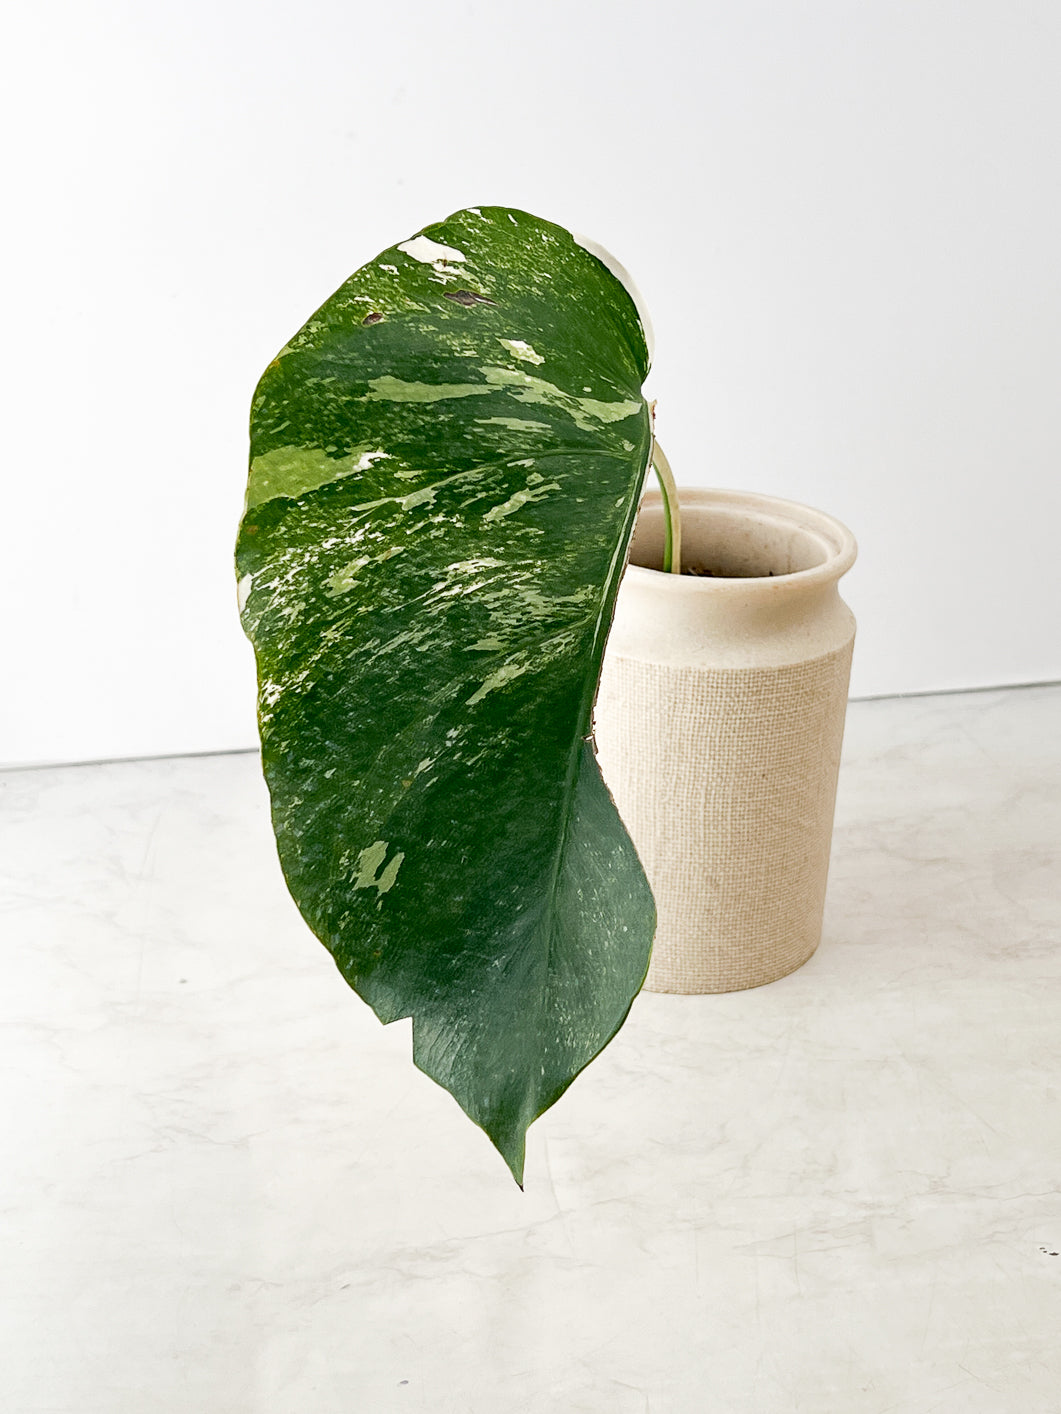 Monstera Albo White Tiger 1 leaf double node slightly rooted